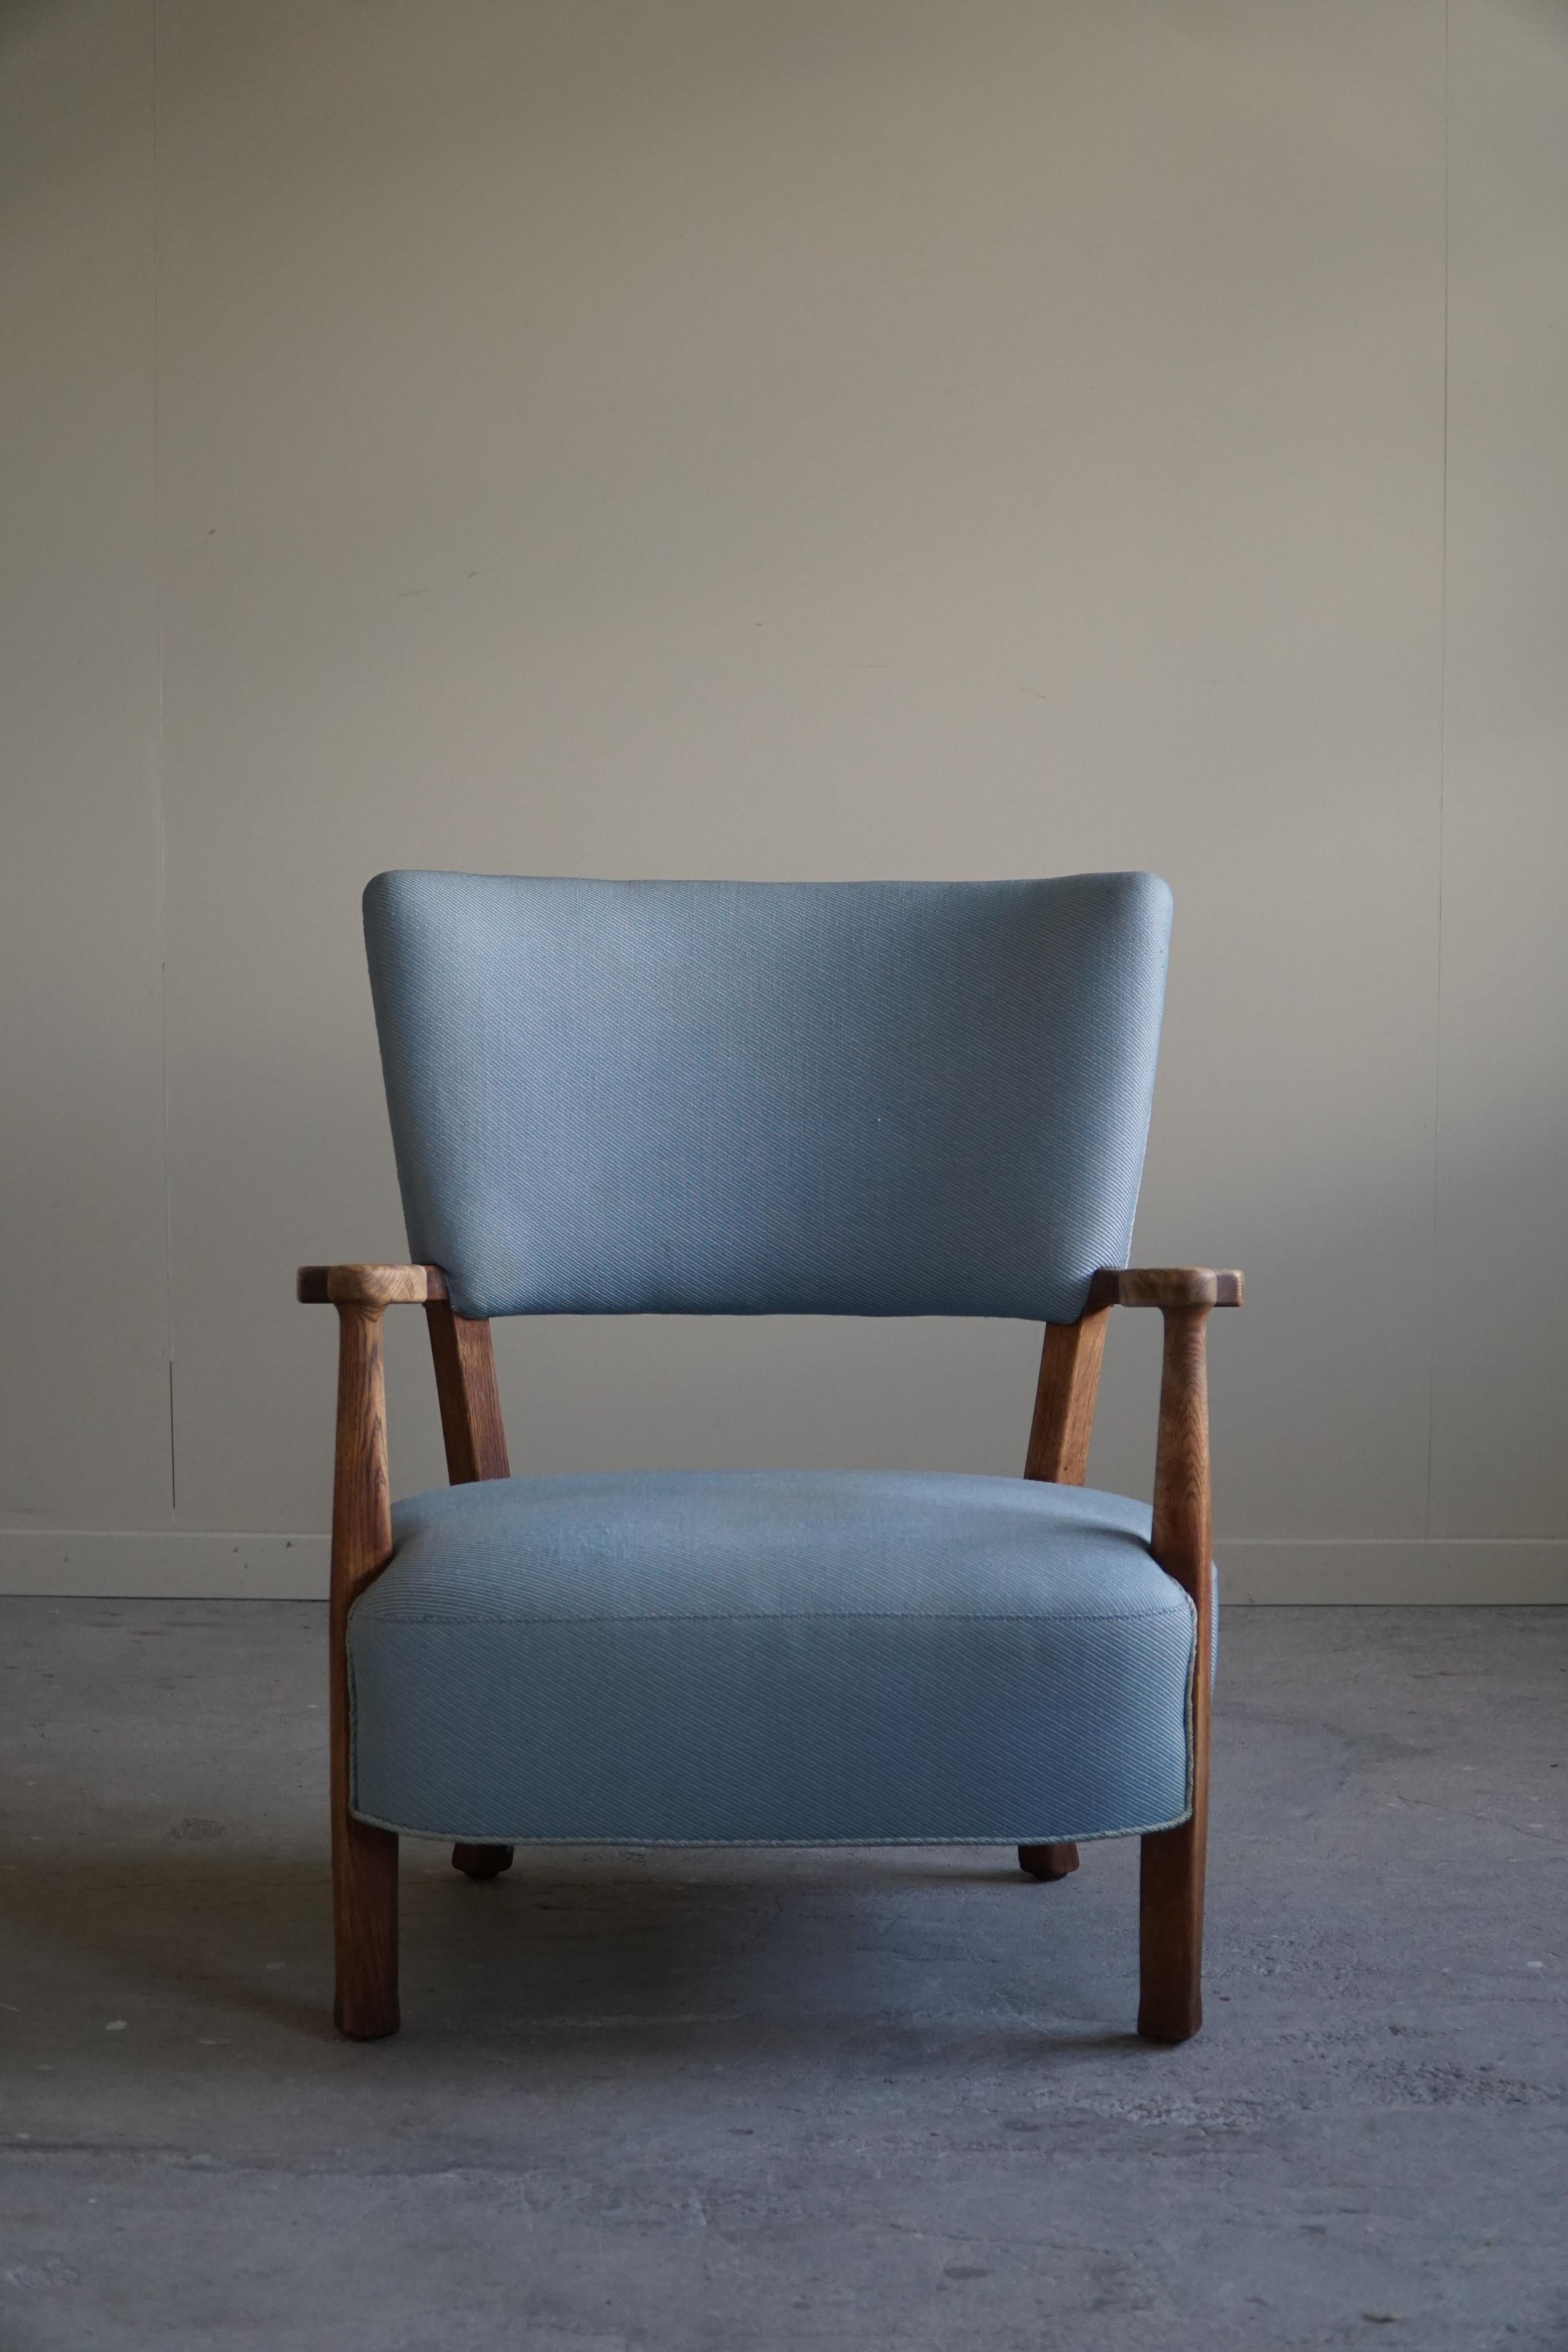 Danish Modern, Curved Lounge Chair in Oak, Attributed to Viggo Boesen, 1950s For Sale 4